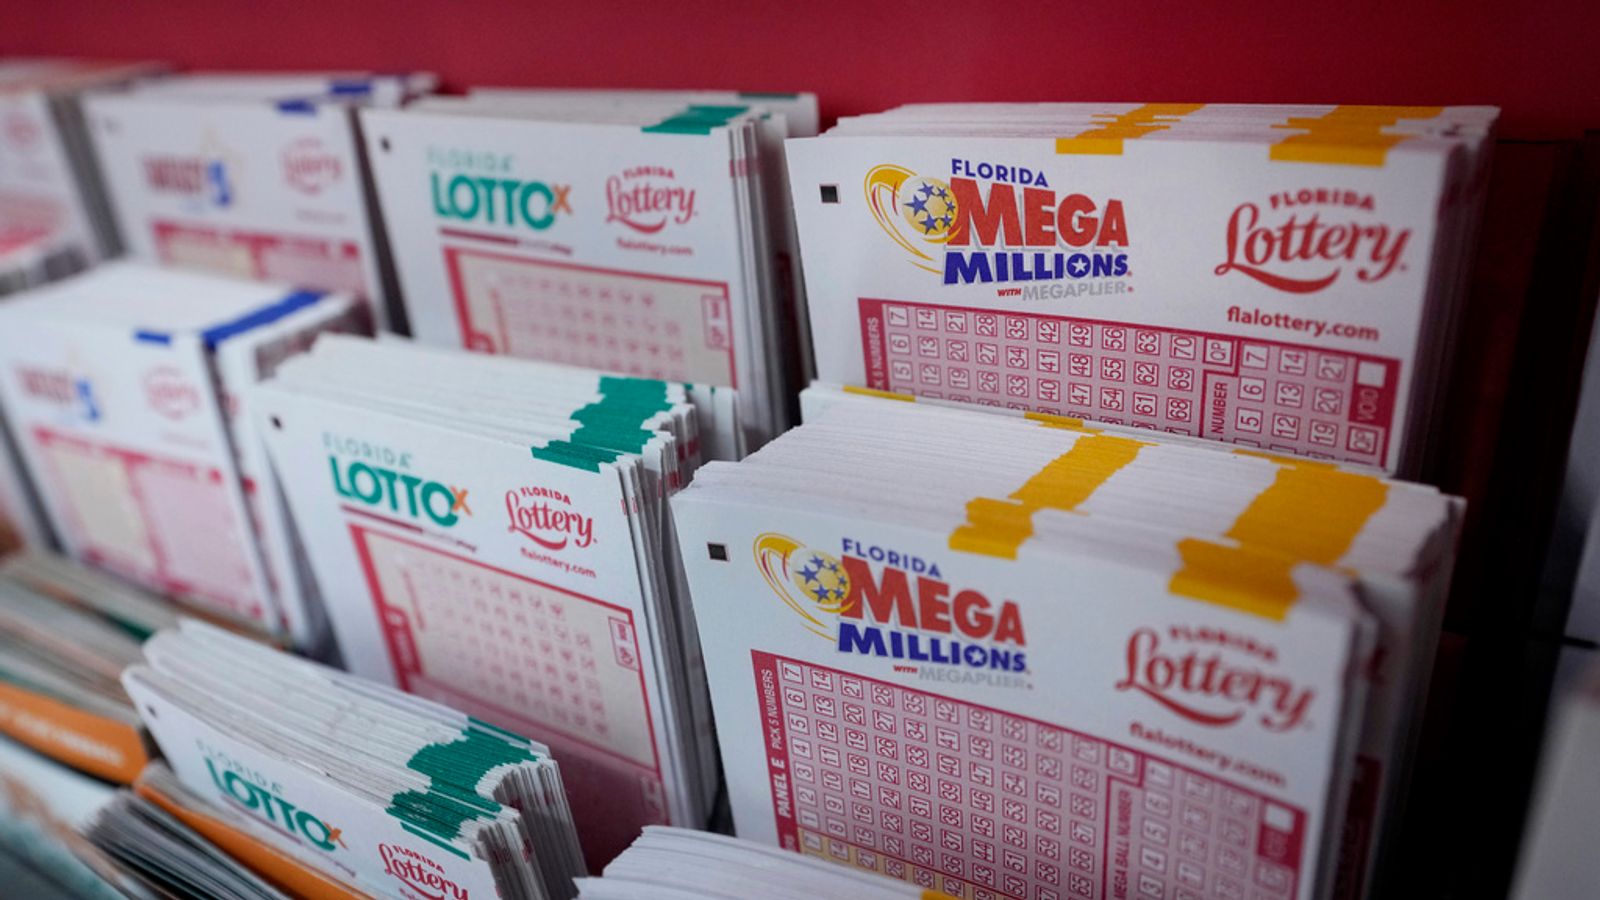 Mega Millions jackpot winner claims .6bn prize after buying ticket in Florida supermarket